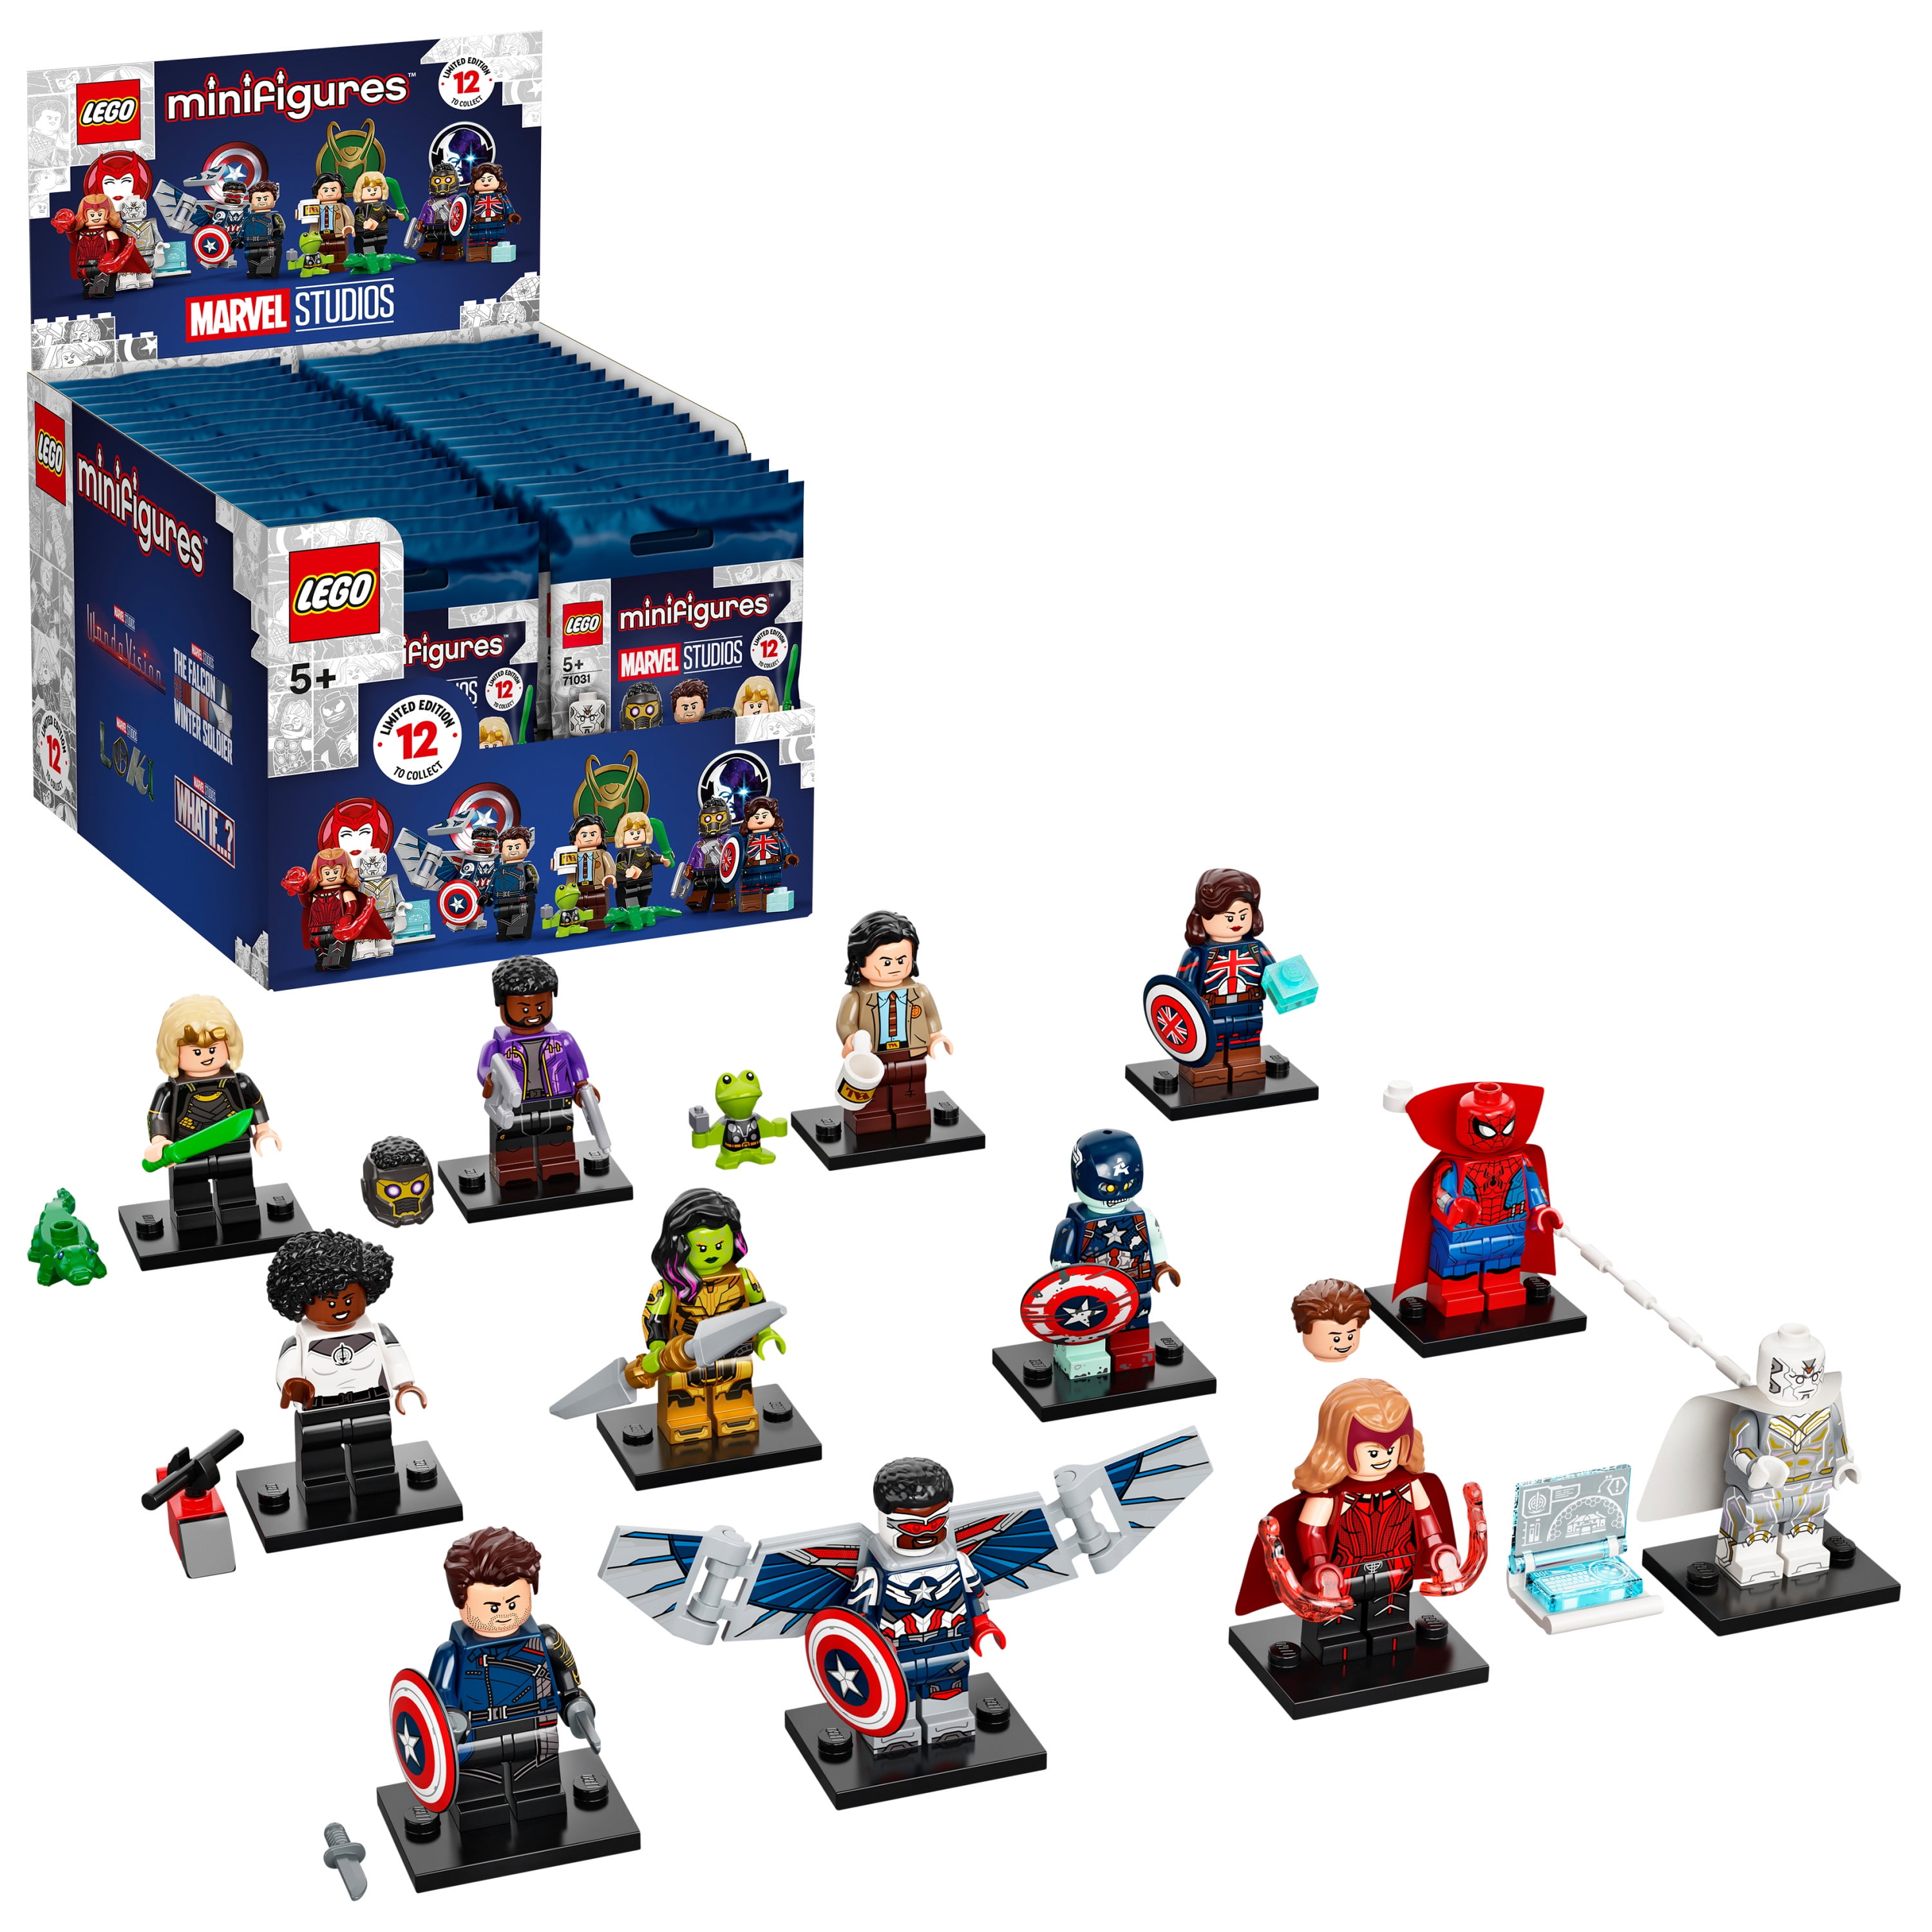 LEGO Minifigures Series 8 Complete Set 0f 16 for sale online